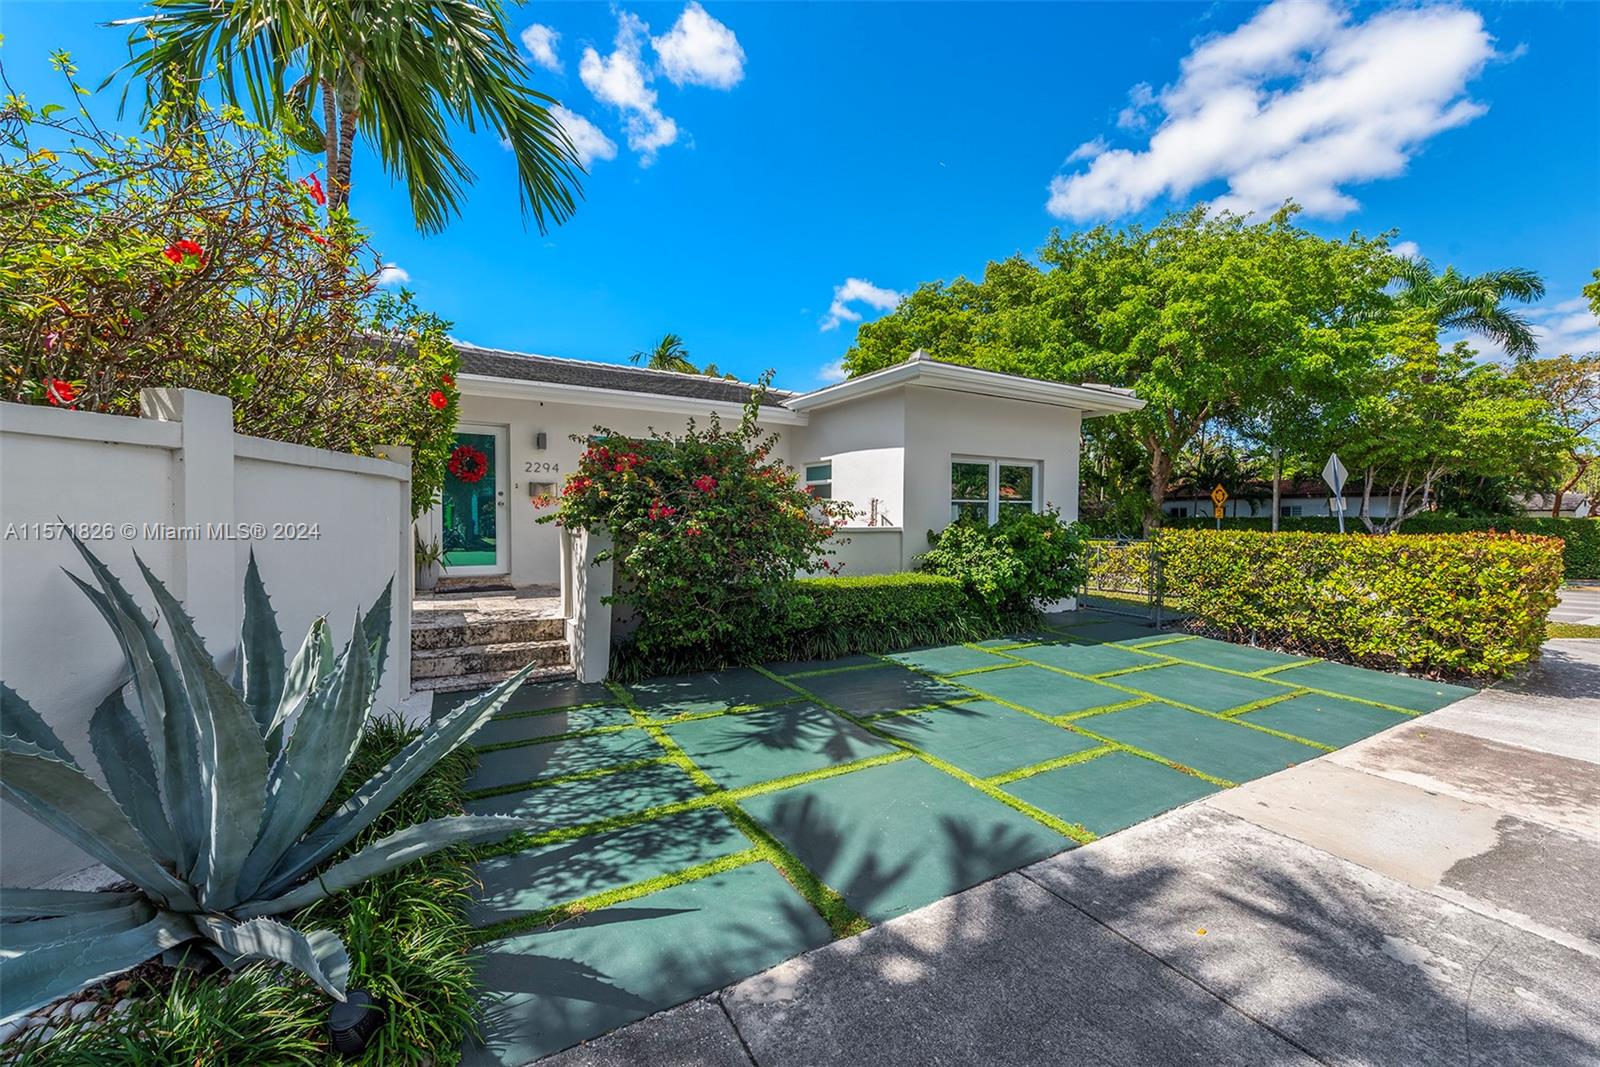 Discover this beautifully renovated home on a large corner lot in Silver Bluff, boasting two yards and parking for up to 3 cars. Just steps from Phase 2 of the Underline—a 10-mile linear park, urban trail, and art destination—this residence offers easy access to Brickell, Coral Gables, and Coconut Grove. The European kitchen, with its Open Design concept that seamlessly flows into the dining and living areas, creates a convenient split-floor plan. Luxurious bathrooms and upgraded floors add to the allure, while fresh paint breathes new life into every corner. Impact windows dampen outside noise, while allowing sunlight to bathe the home inside. New Roof, Pool Pumps, revamped A/C plus ducts ensure comfort year-round. Visit our Open House schedule or book a private tour around your schedule.